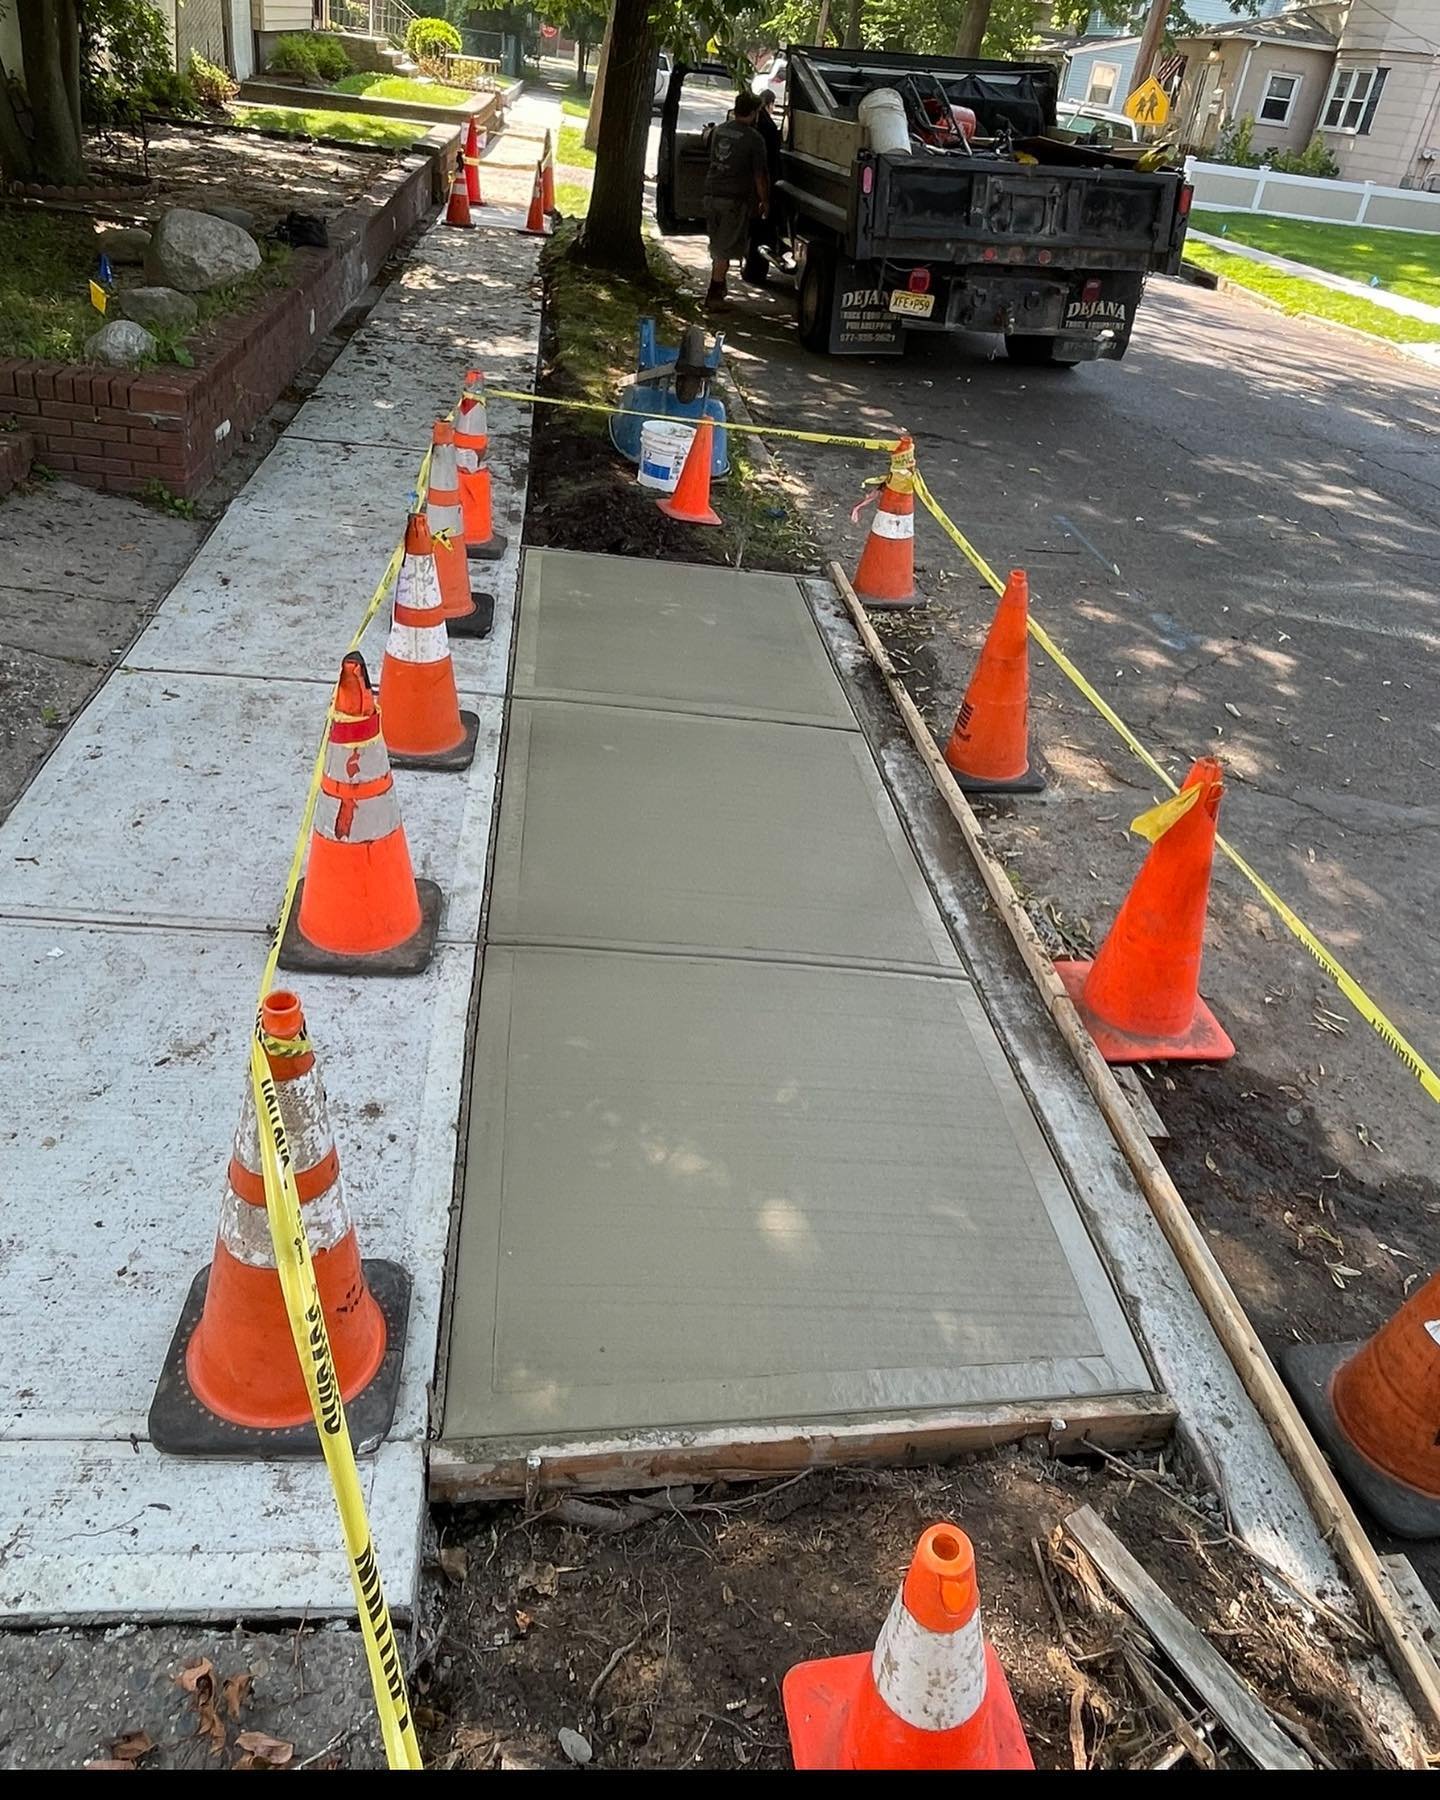 Take a look at some of our recent sidewalk replacements! Have a sidewalk that&rsquo;s cracked or lifted? Give us a call for your free estimate today! 

#concrete #masonry #njrealestate #bergencountynj #passaiccountynj #paverpatio #landscaping #landsc